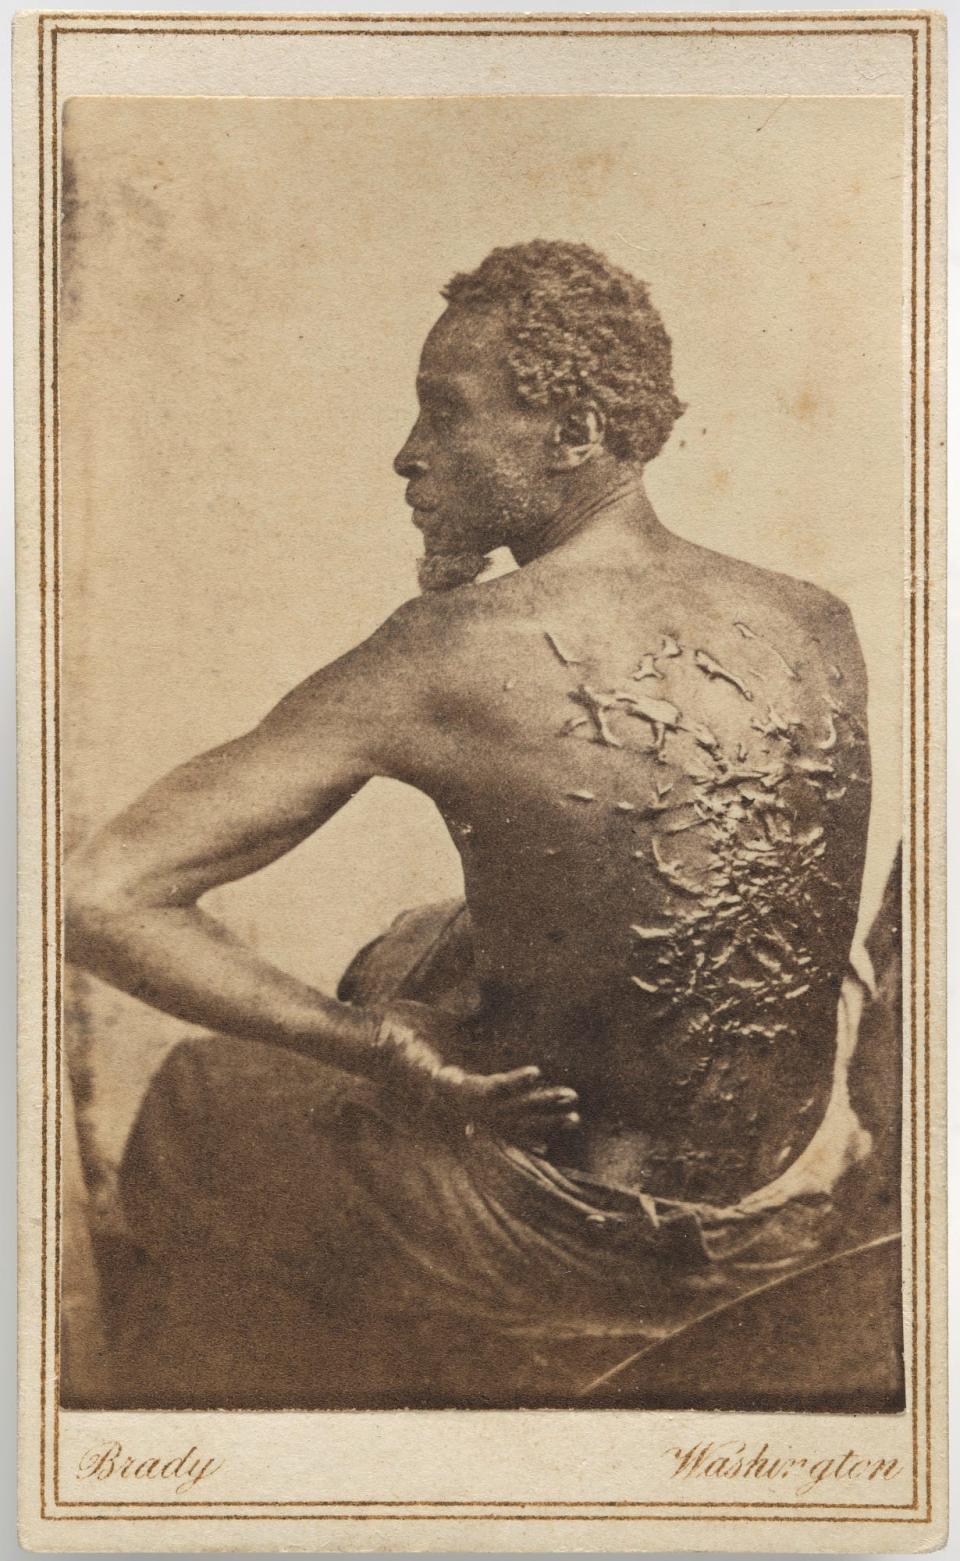 "The Scourged Back" photograph taken by William McPherson with Mr Oliver of "Peter." Baton Rouge, Louisiana. 1863.